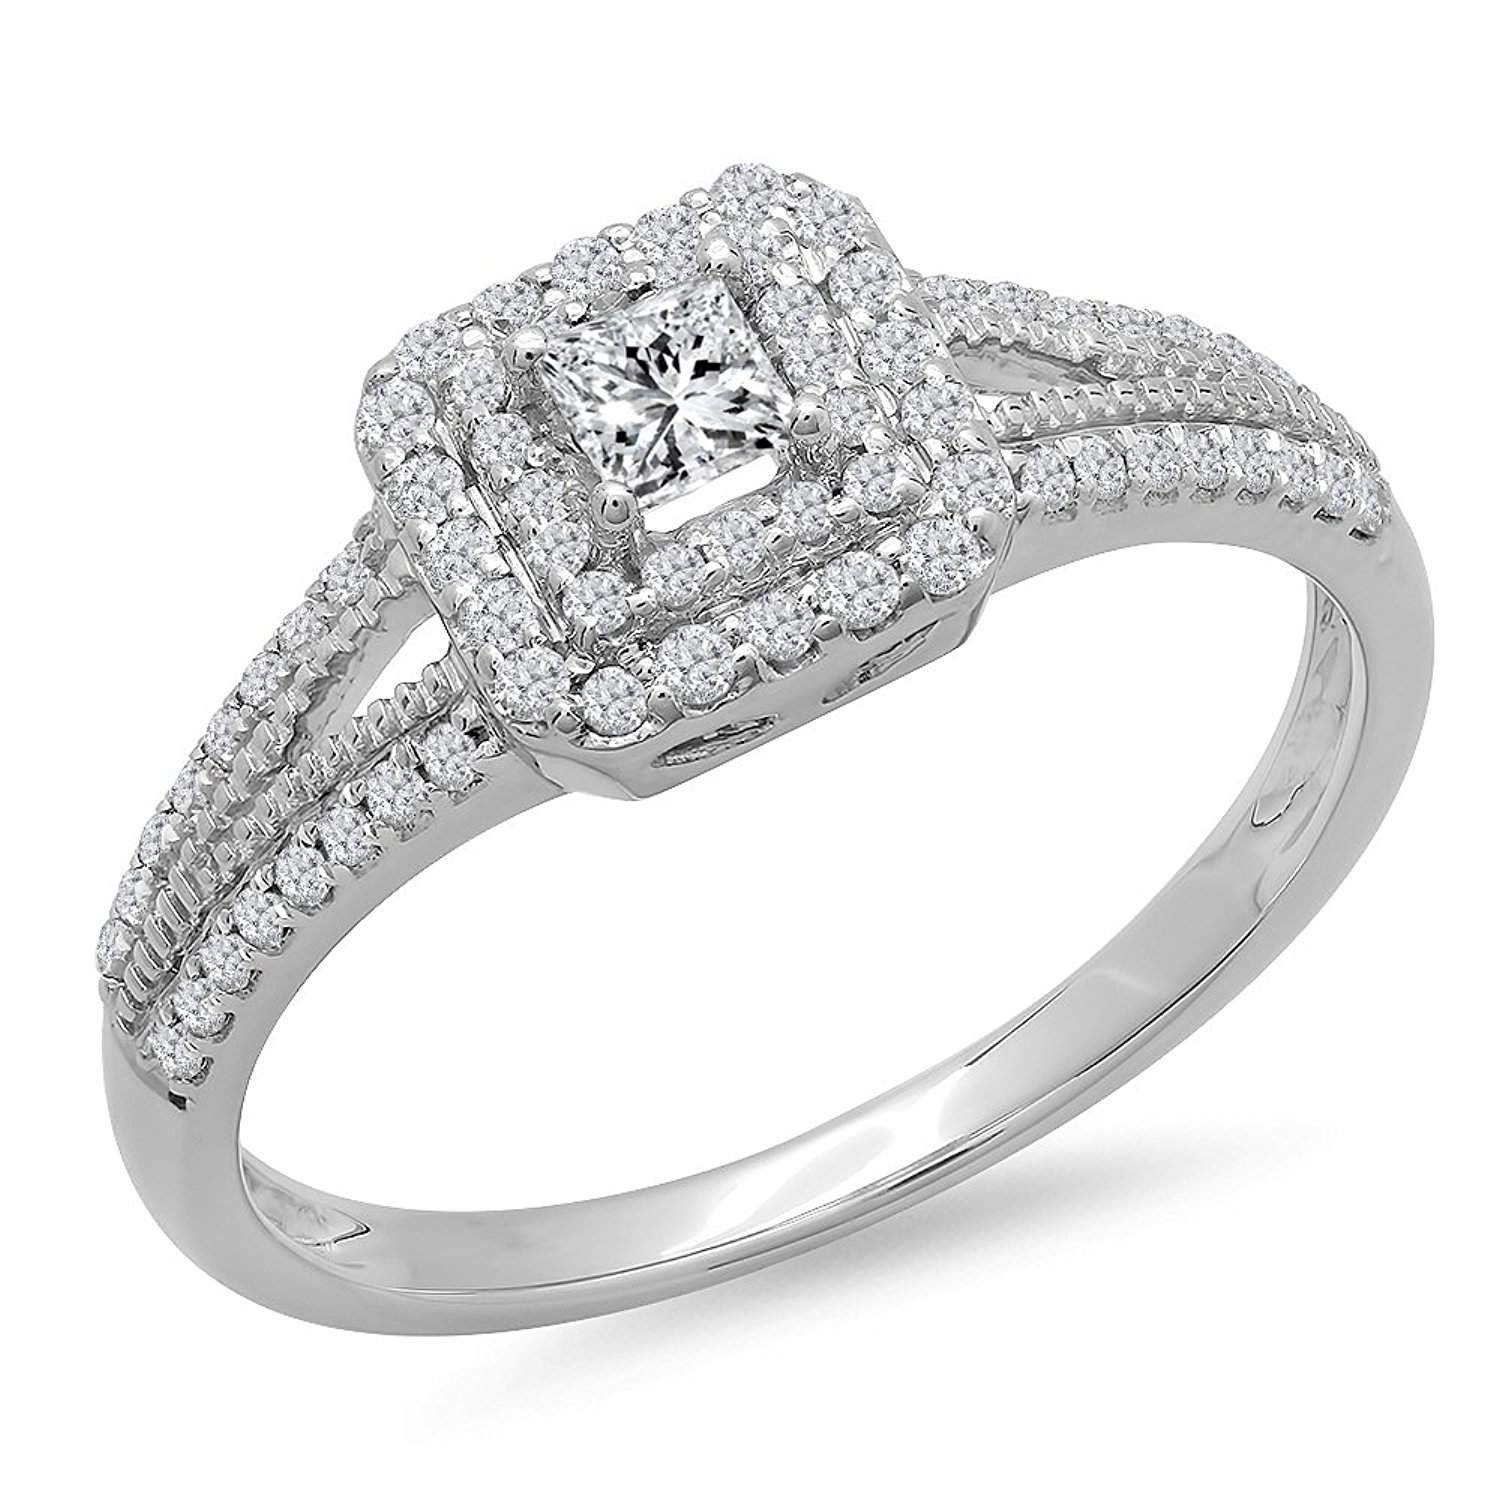 Cheapest Wedding Rings
 Top 10 Best Valentine’s Day Deals on Engagement Rings